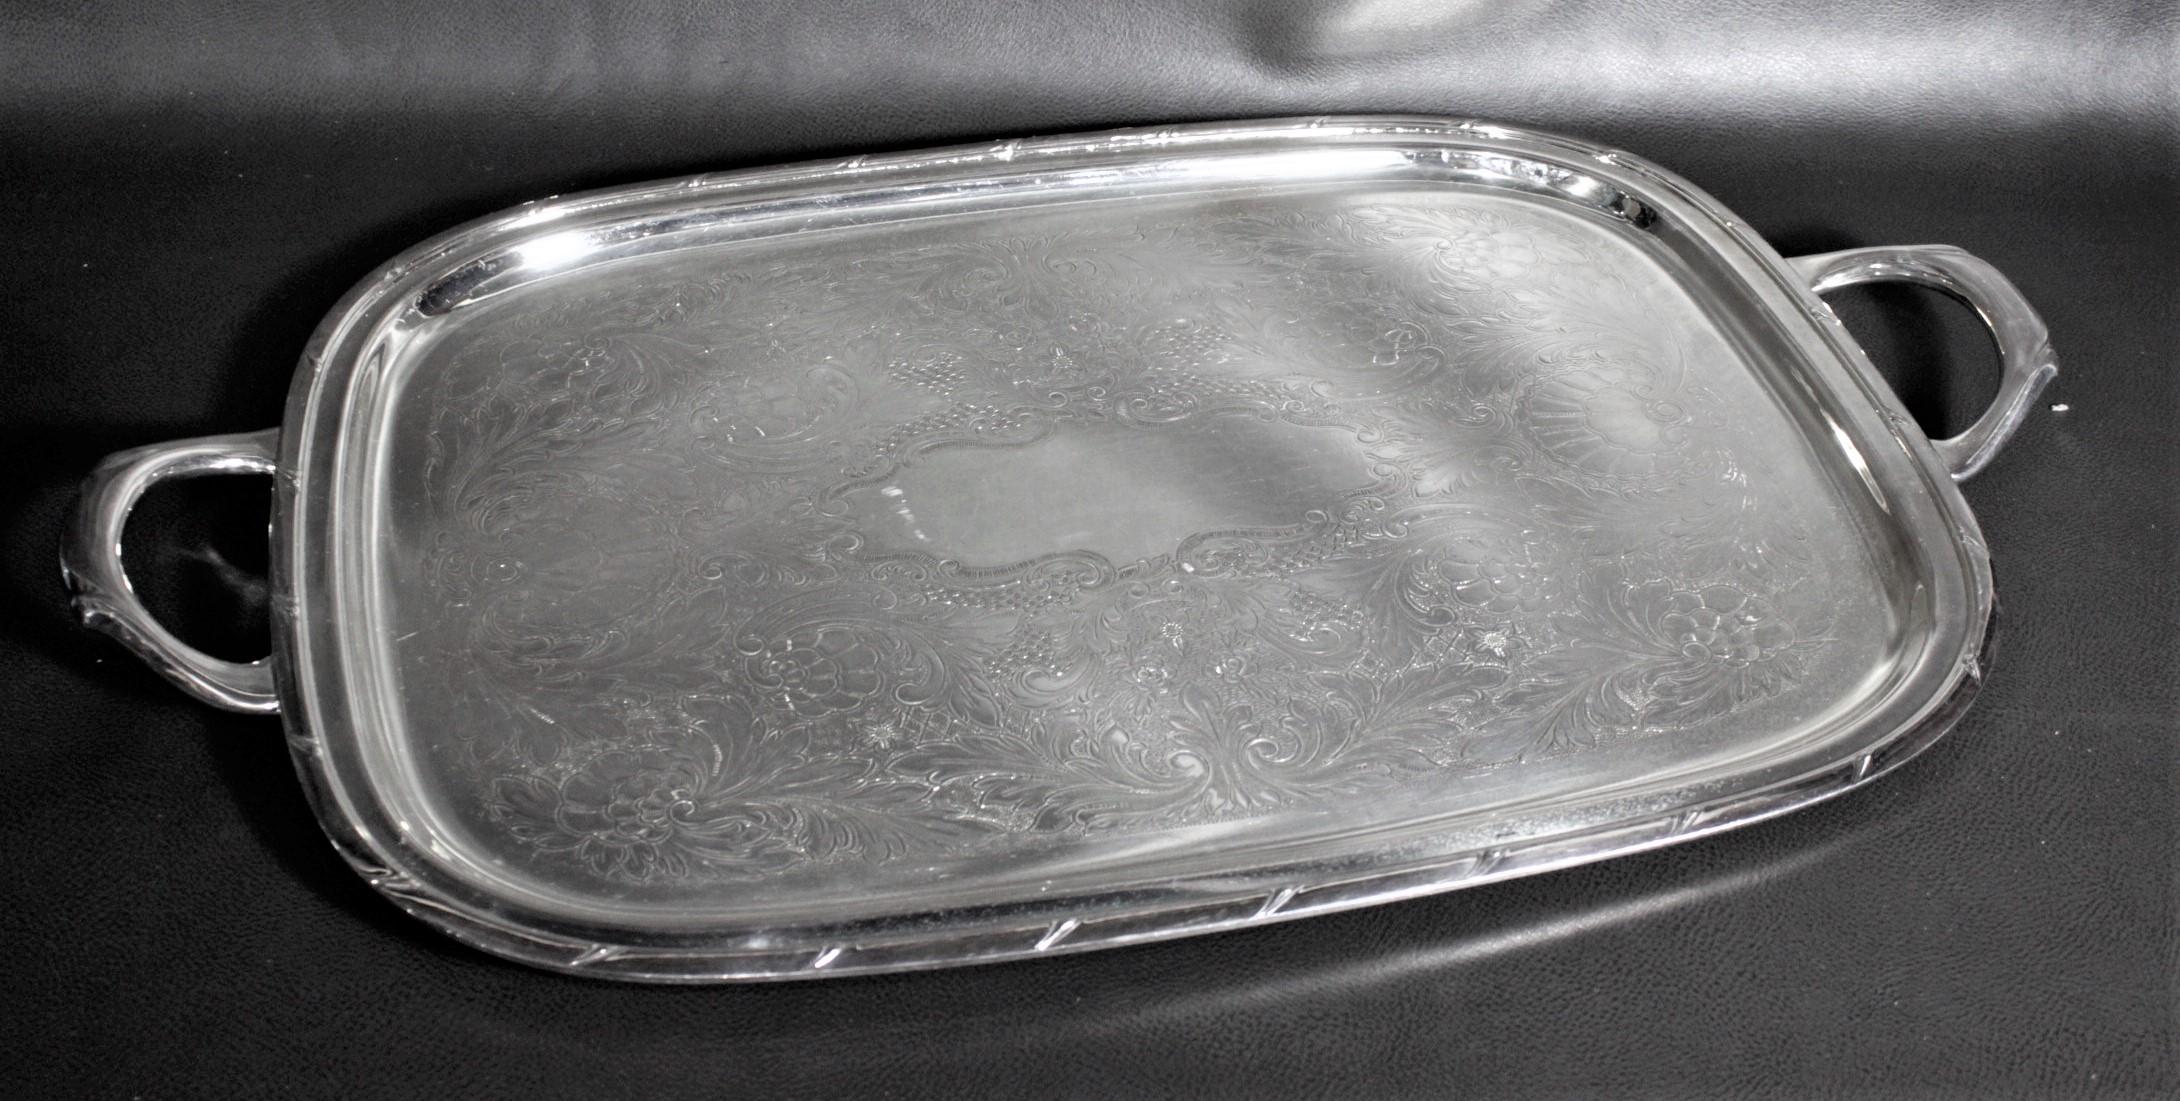 This silver plated serving tray was made by Rogers of Canada in approximately 1960 in an Edwardian antique style. The tray has a simple series of indentations around the raised outer rim, and considerable engraved scrollwork on the tray's surface.